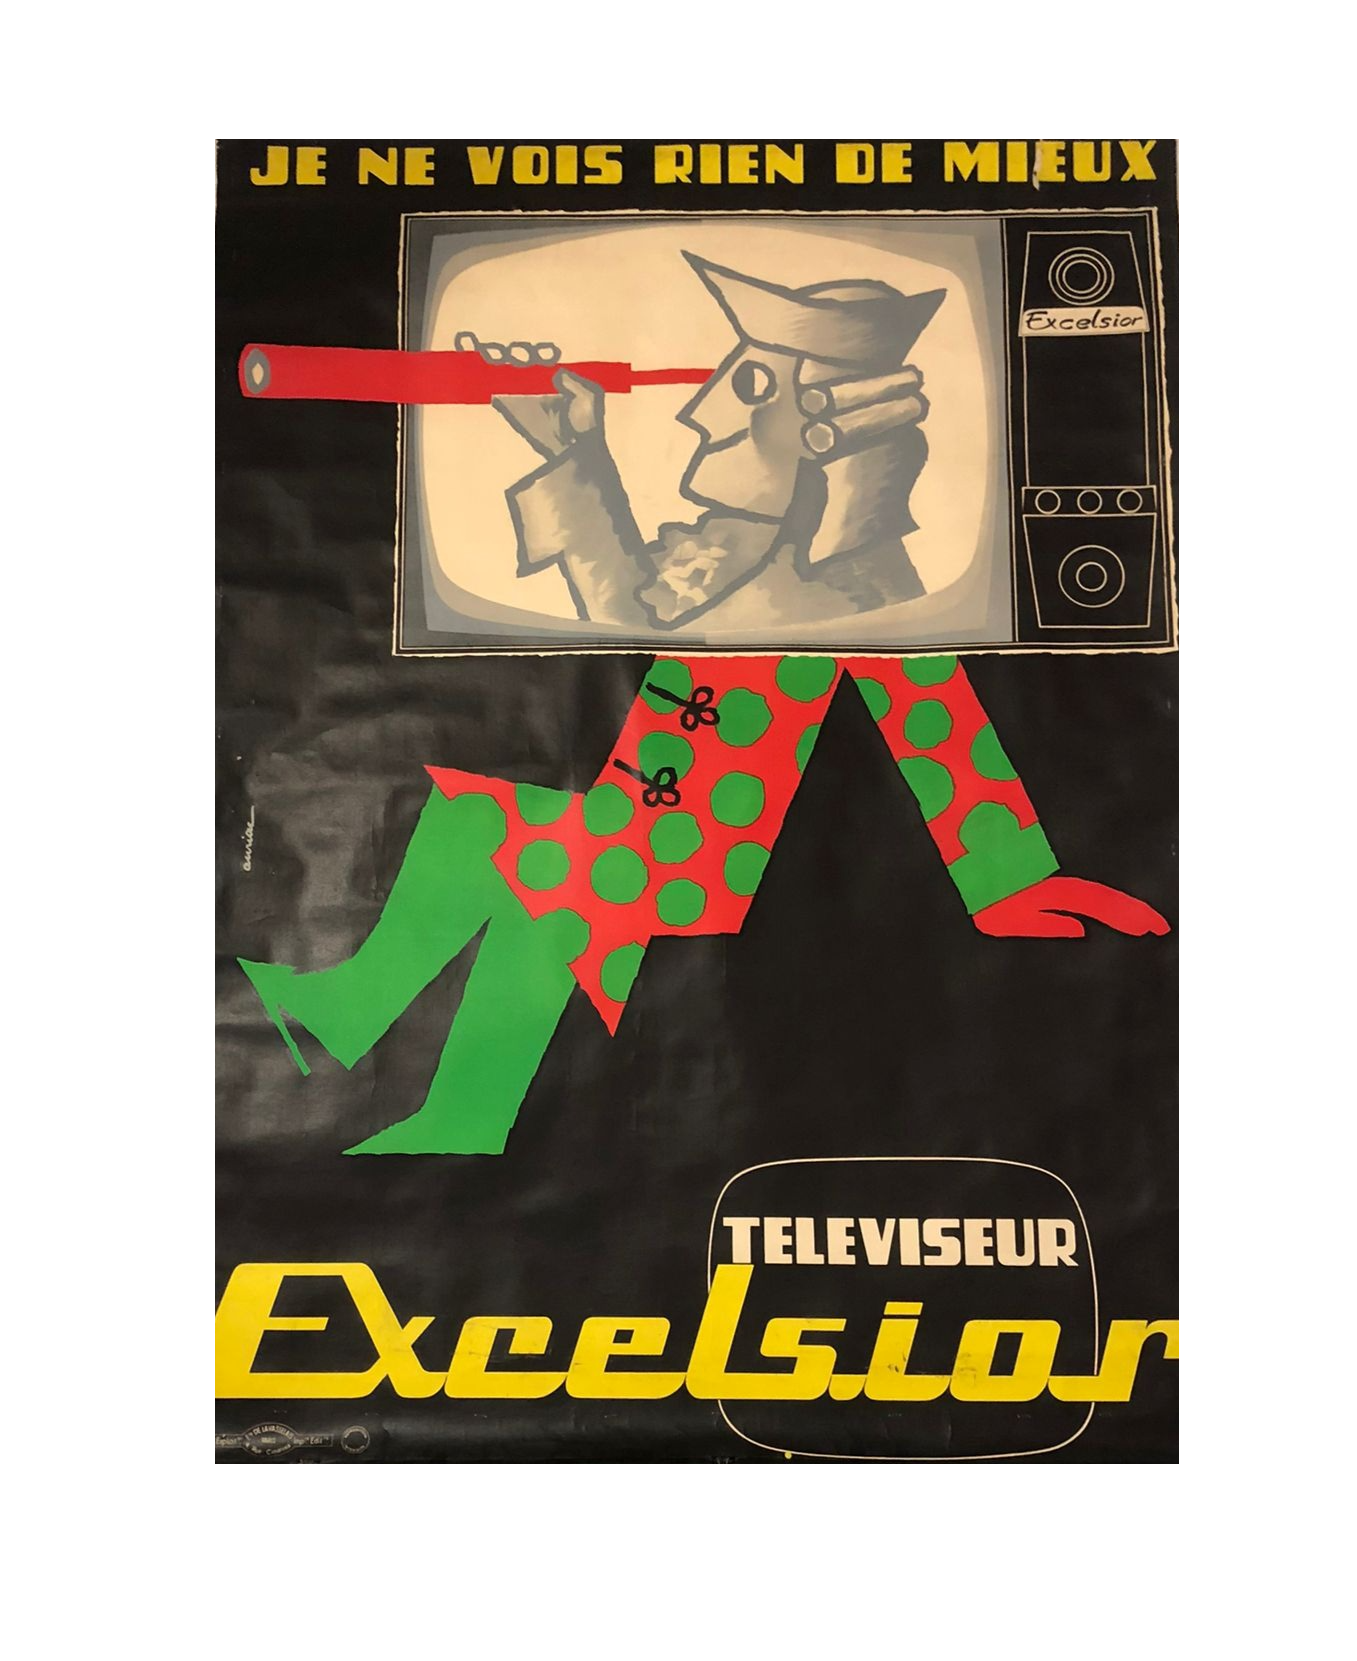 Excelsior Television by Auriac